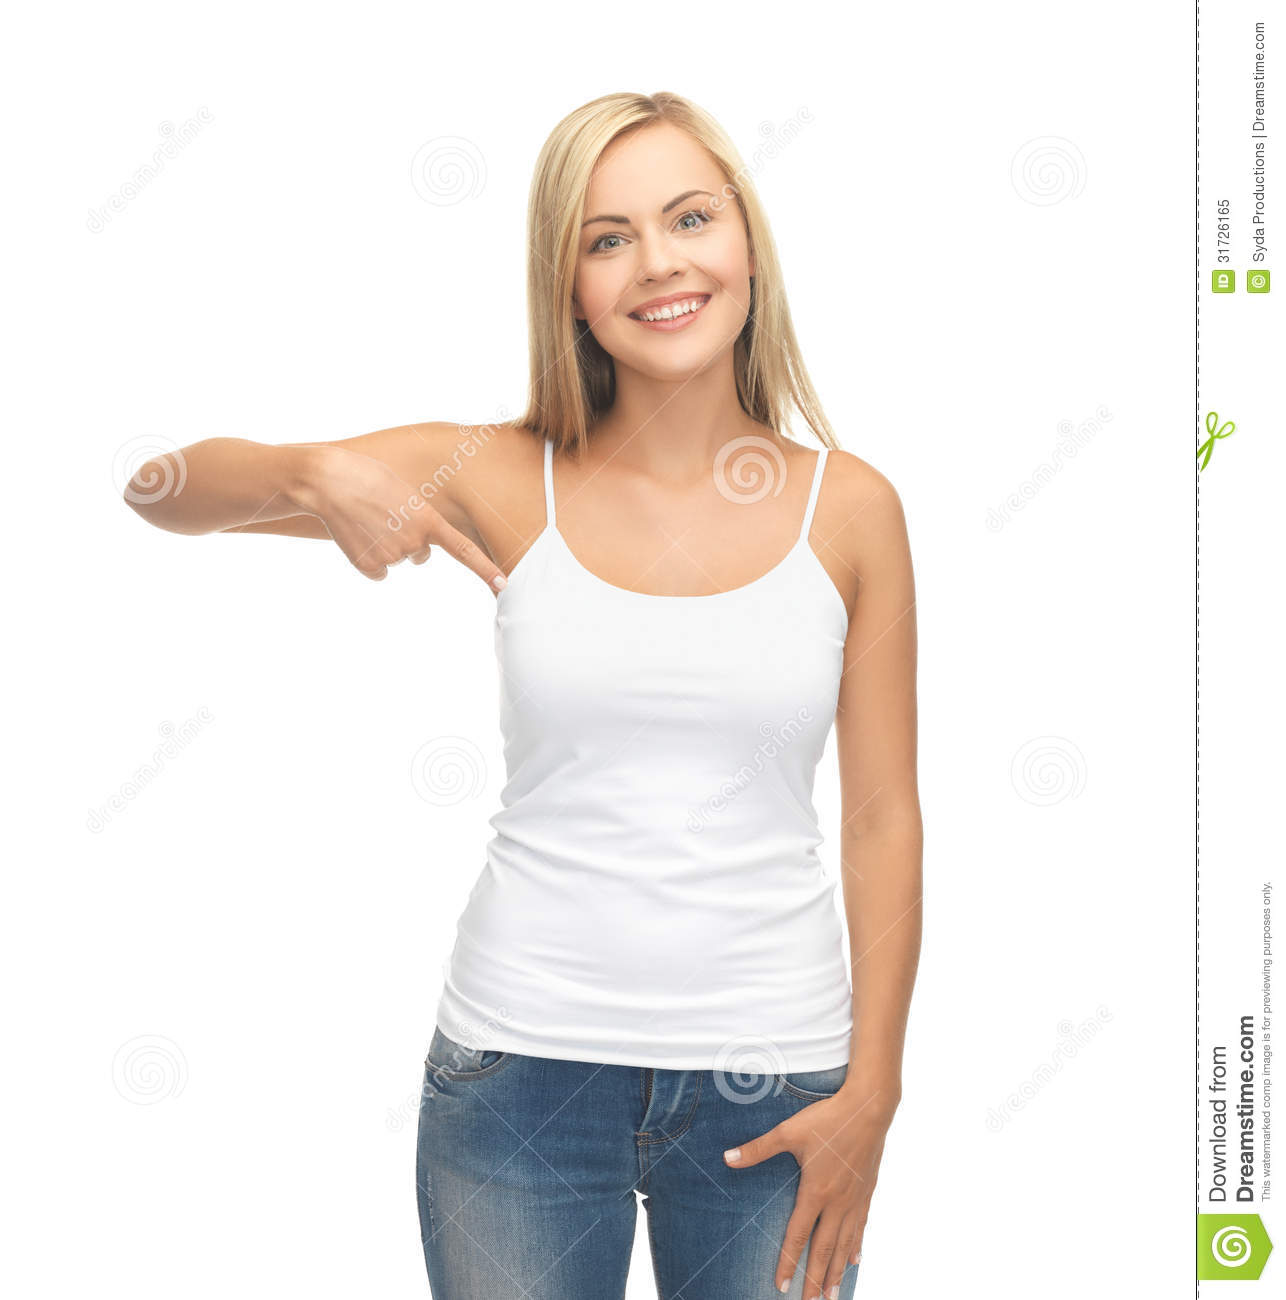 Woman In Blank White T Shirt Pointing At Herself Royalty Free Stock